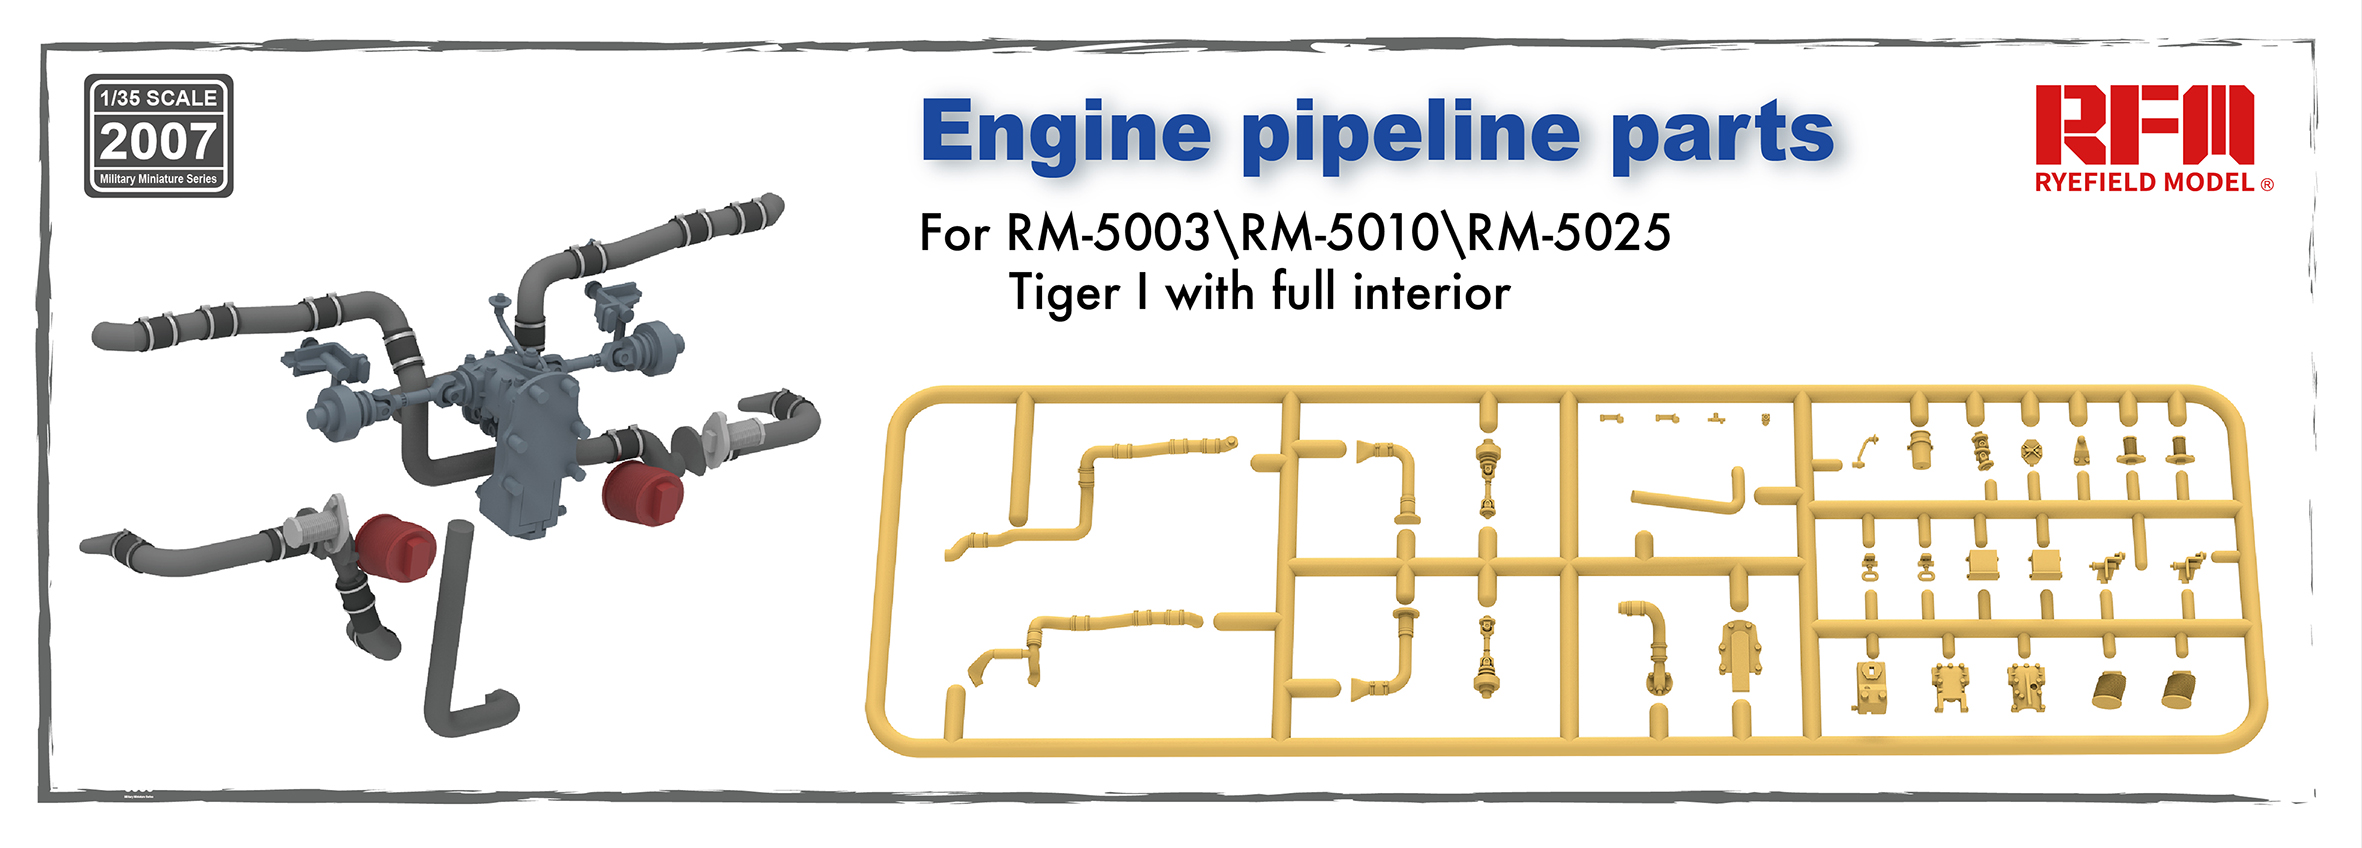 Engine pipeline parts for RM-5003 RM-5010 RM-5025